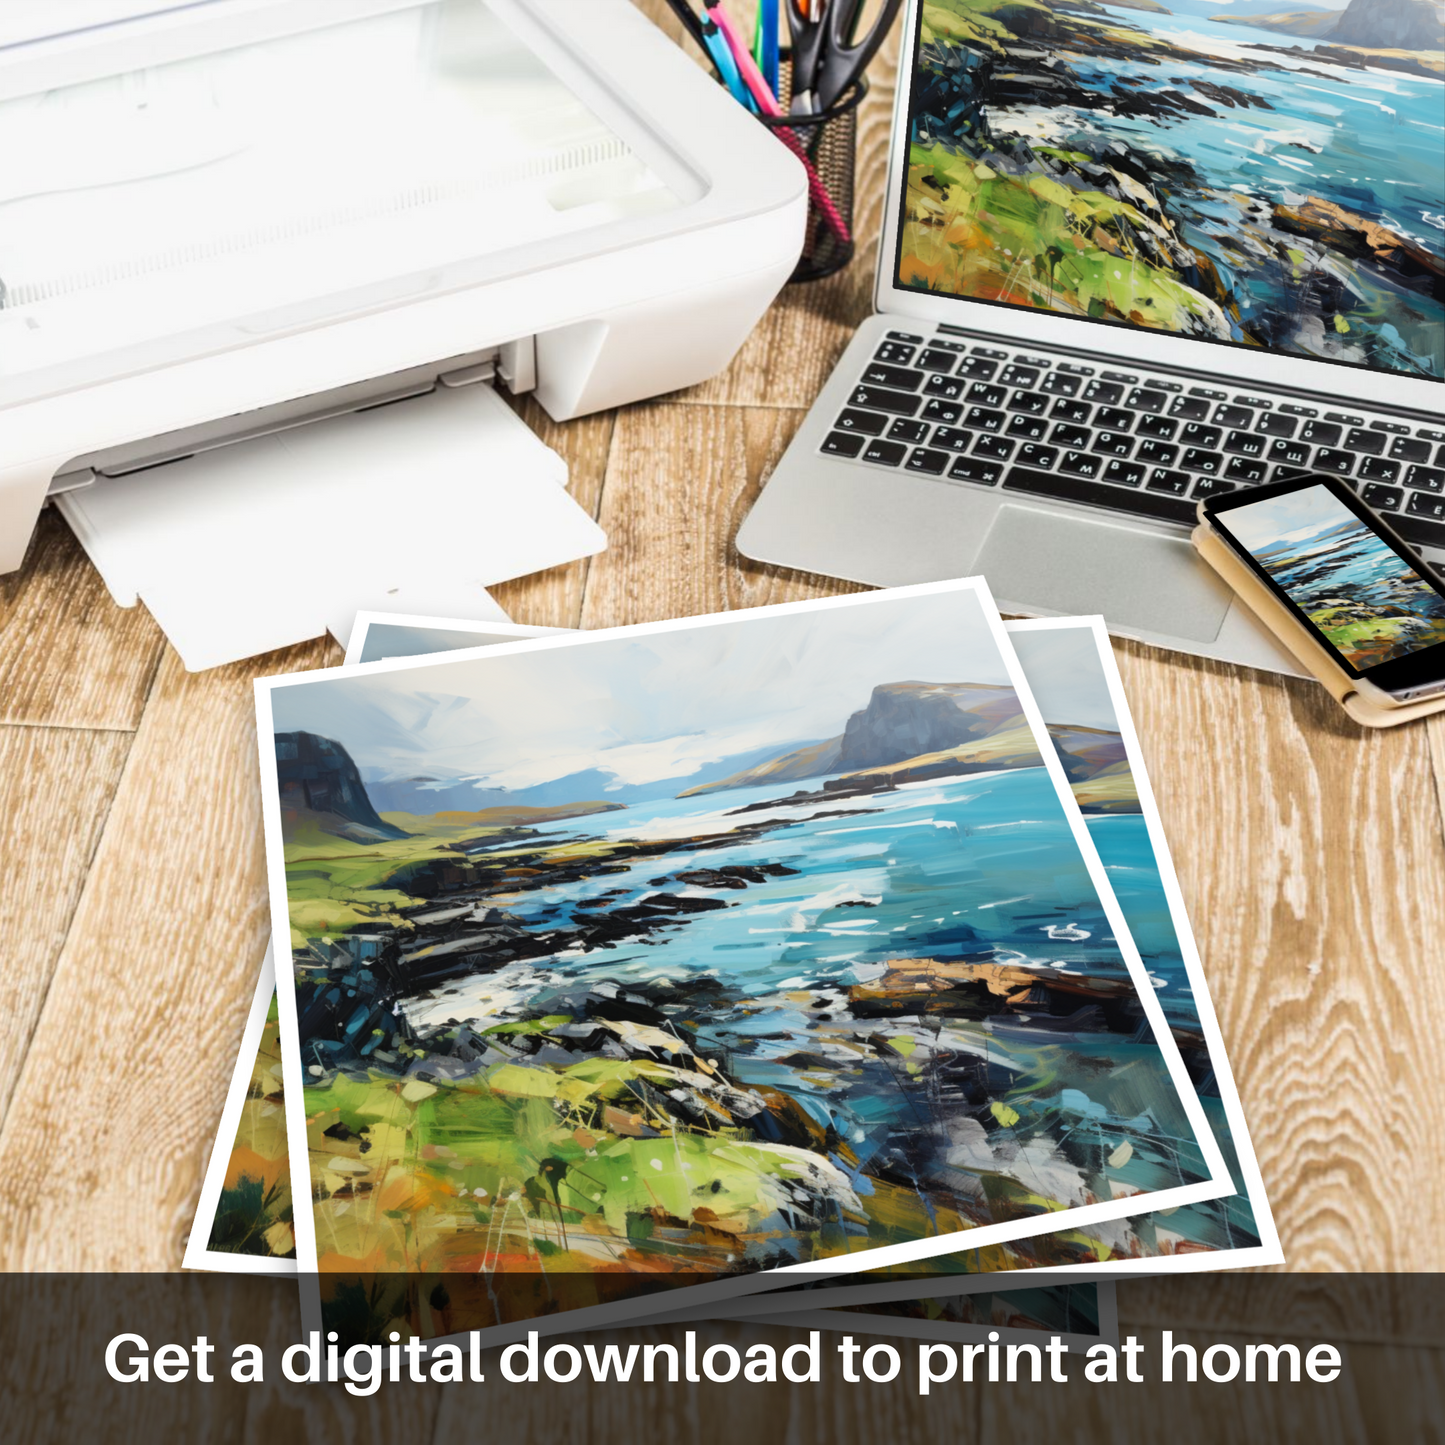 Downloadable and printable picture of Ardtun Bay, Isle of Mull